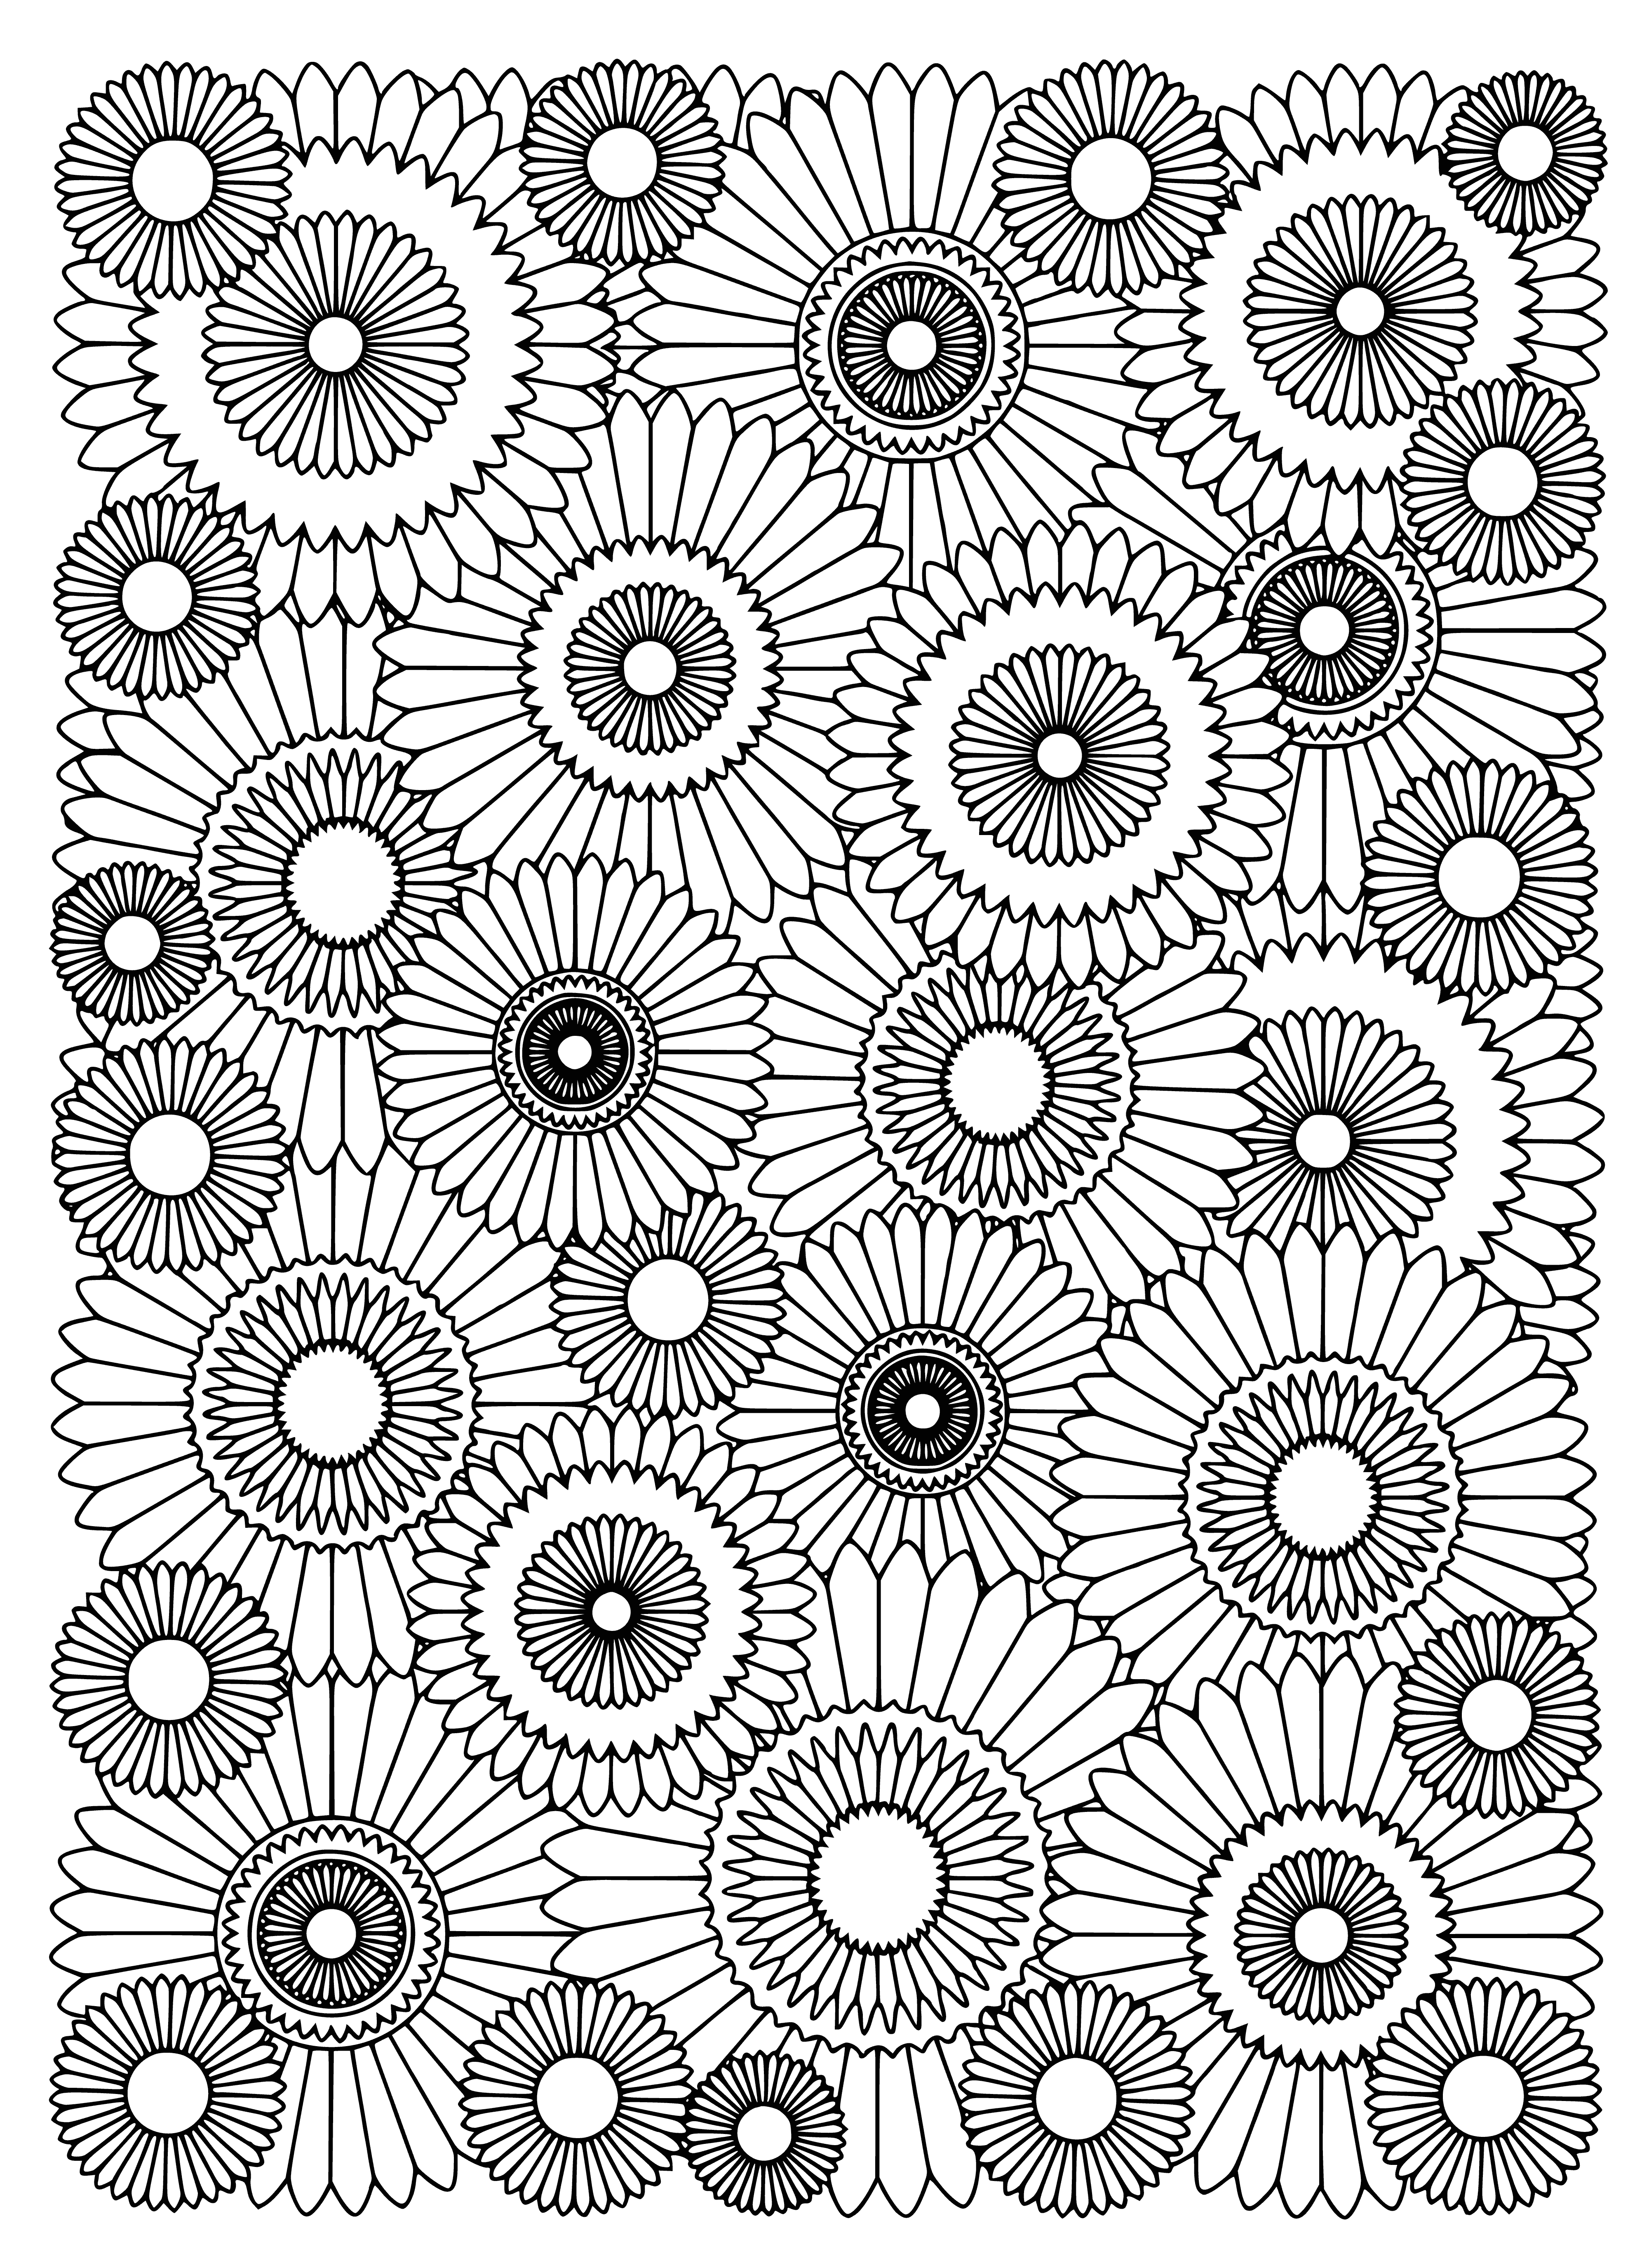 coloring page: Beautiful flowers of varying color and size arranged in a calming gradient background. Each flower detailed with its own pattern and leaves.